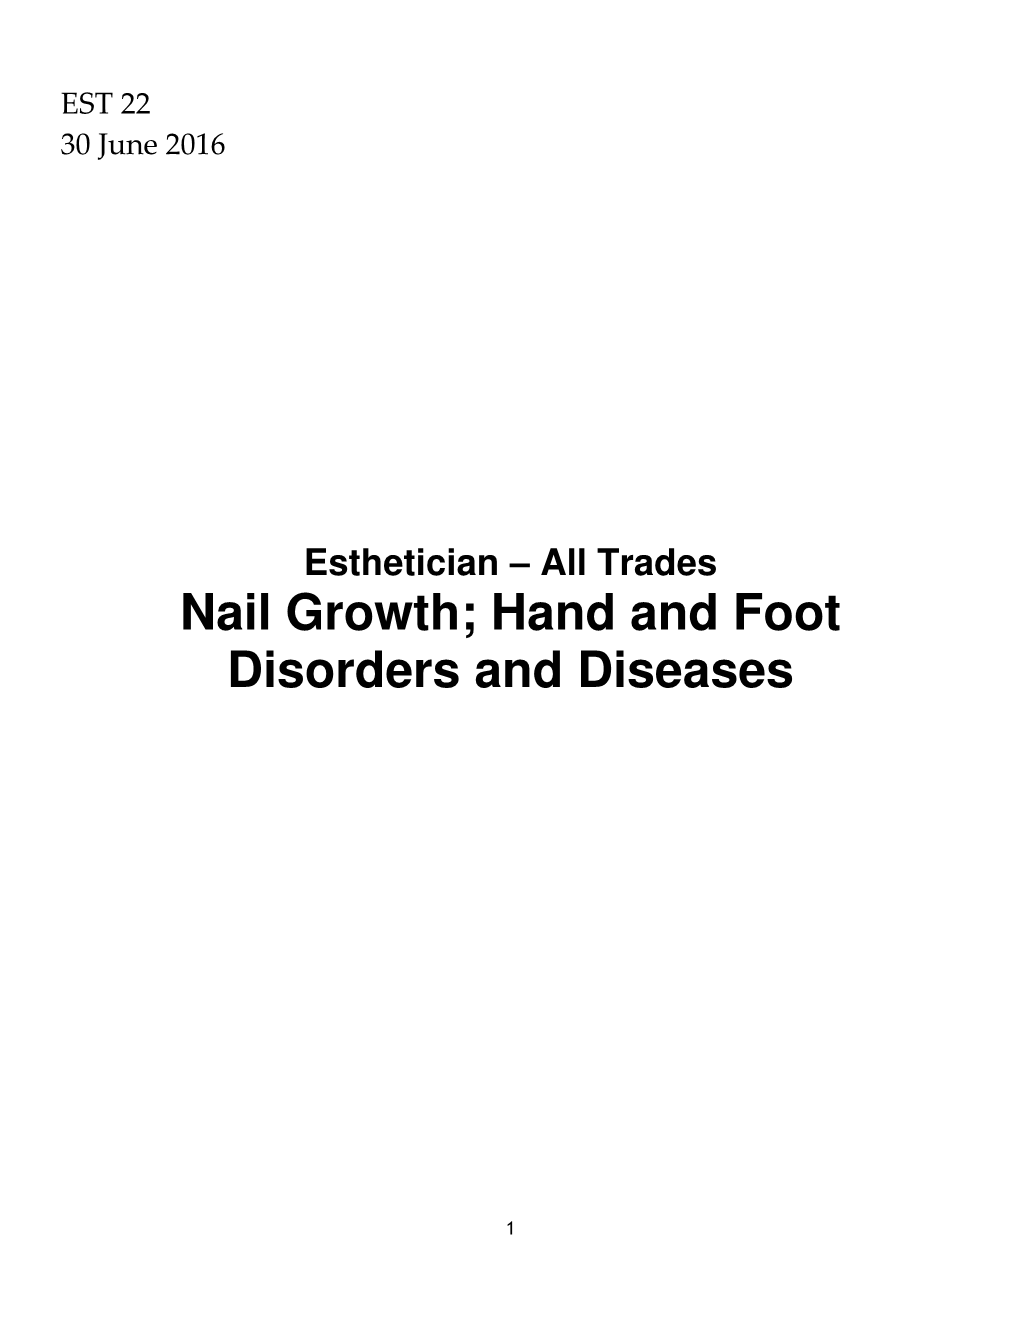 EST 22 Nail Growth Hand and Foot Disorders and Diseases